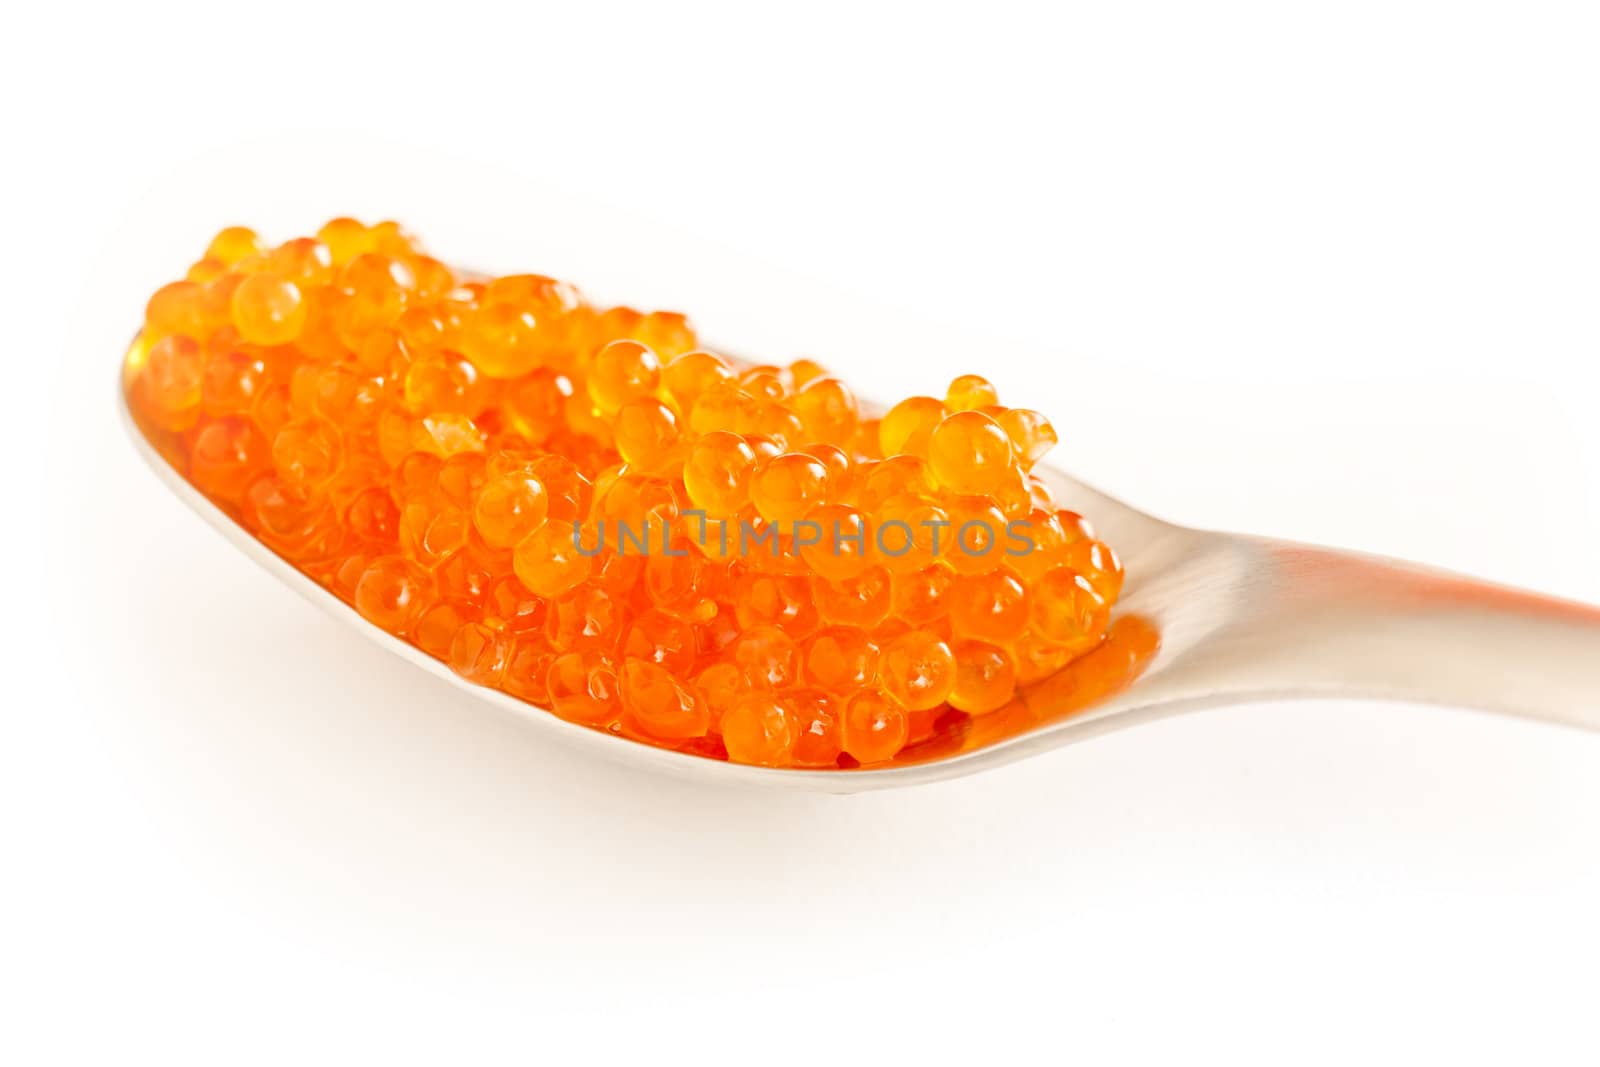 Salmon roe close up over white background